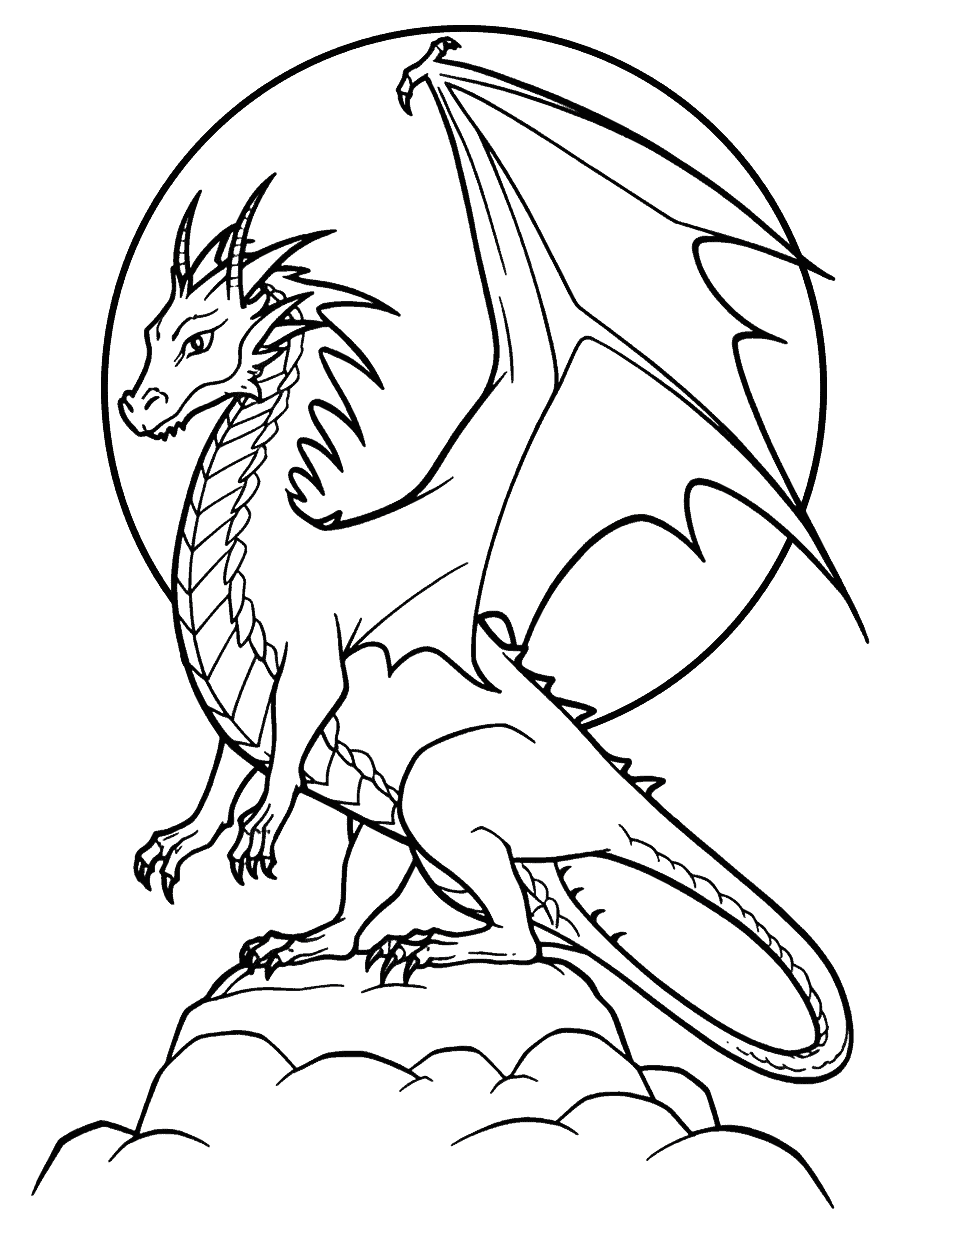 Nightwing Dragon Coloring Page - An ominous Nightwing dragon silhouetted against a full moon.